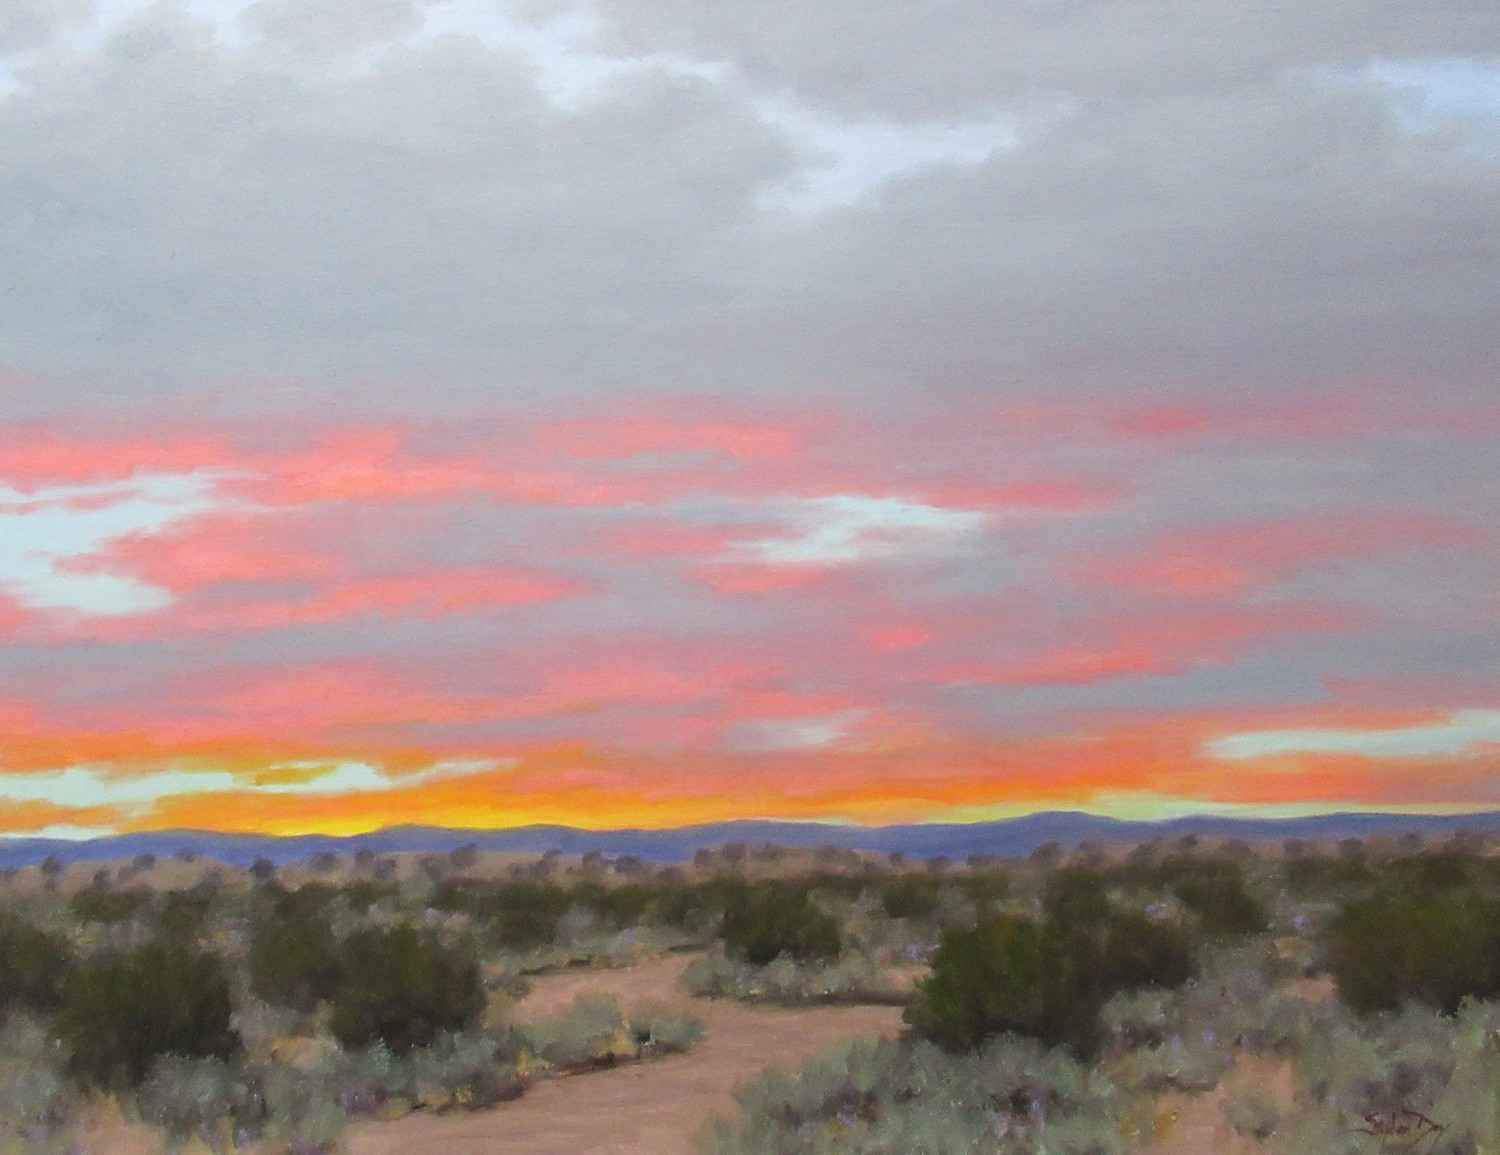 Stephen Day-Placid Evening Sky-Sorrel Sky Gallery-Painting